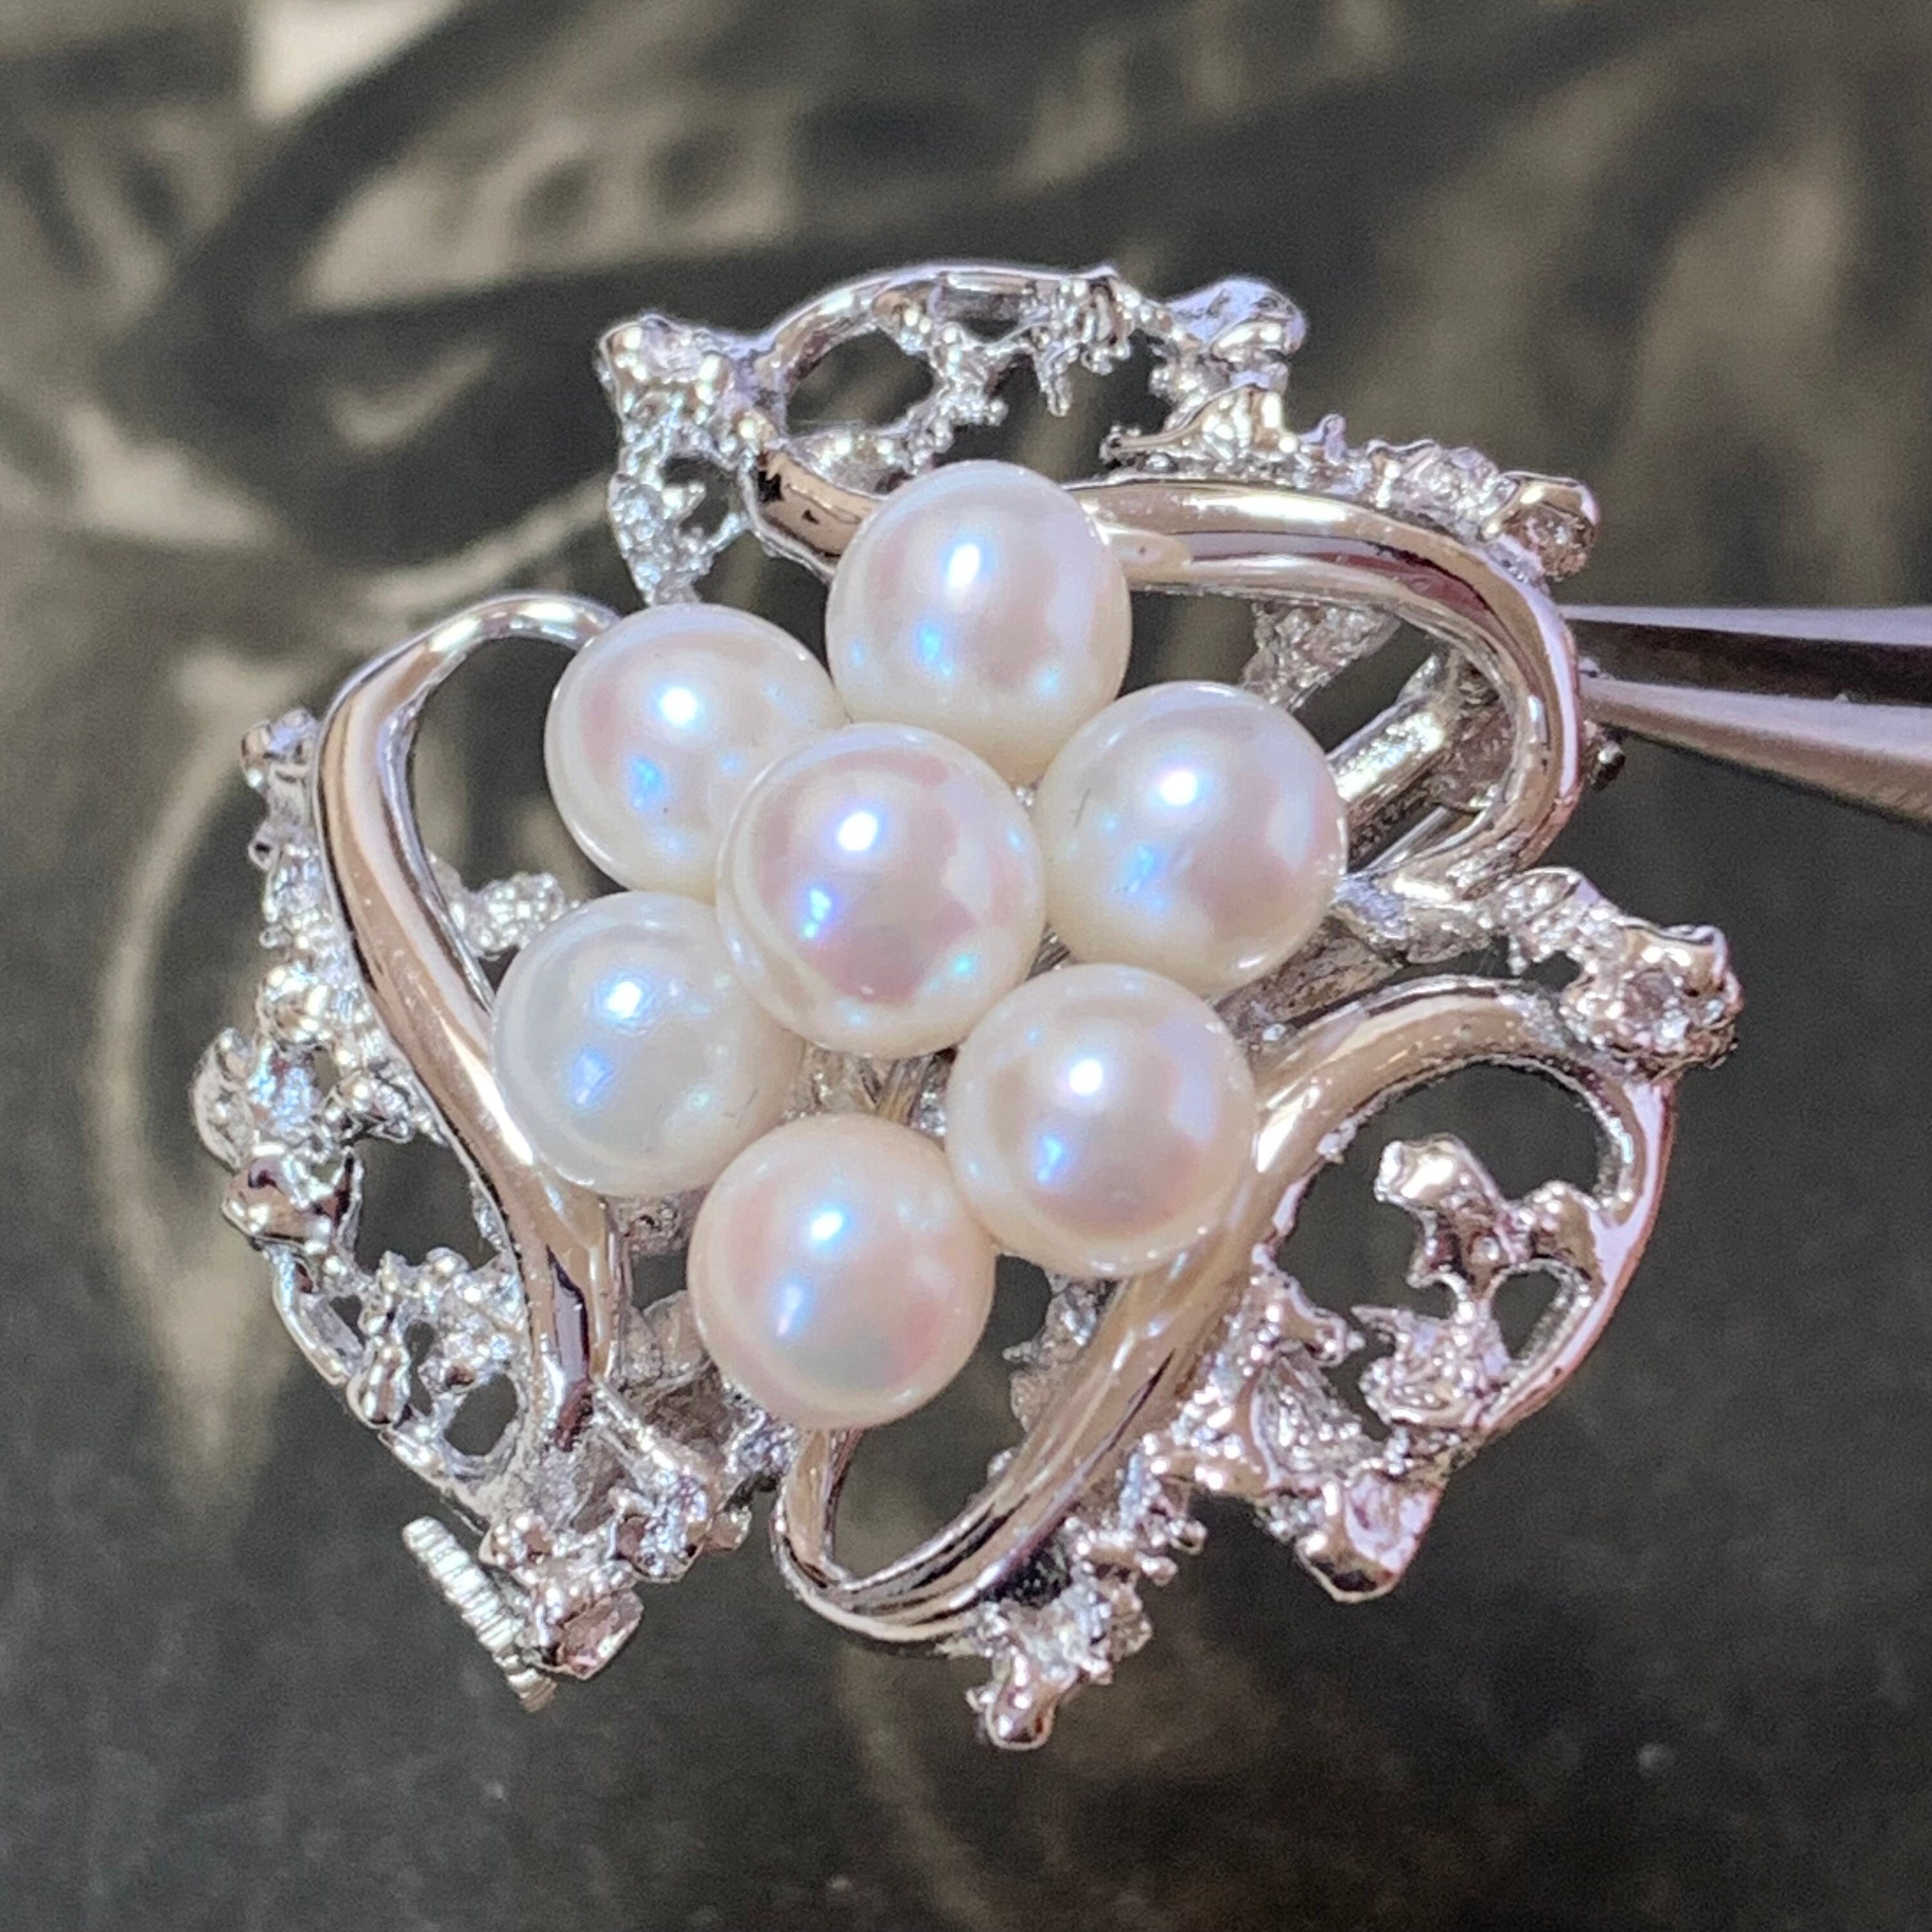 stunning Silver Brooch Set With White Cultured Pearls, Vintage Circa 1980S. Lovely Quality Pearls in An Ornate Flower Design